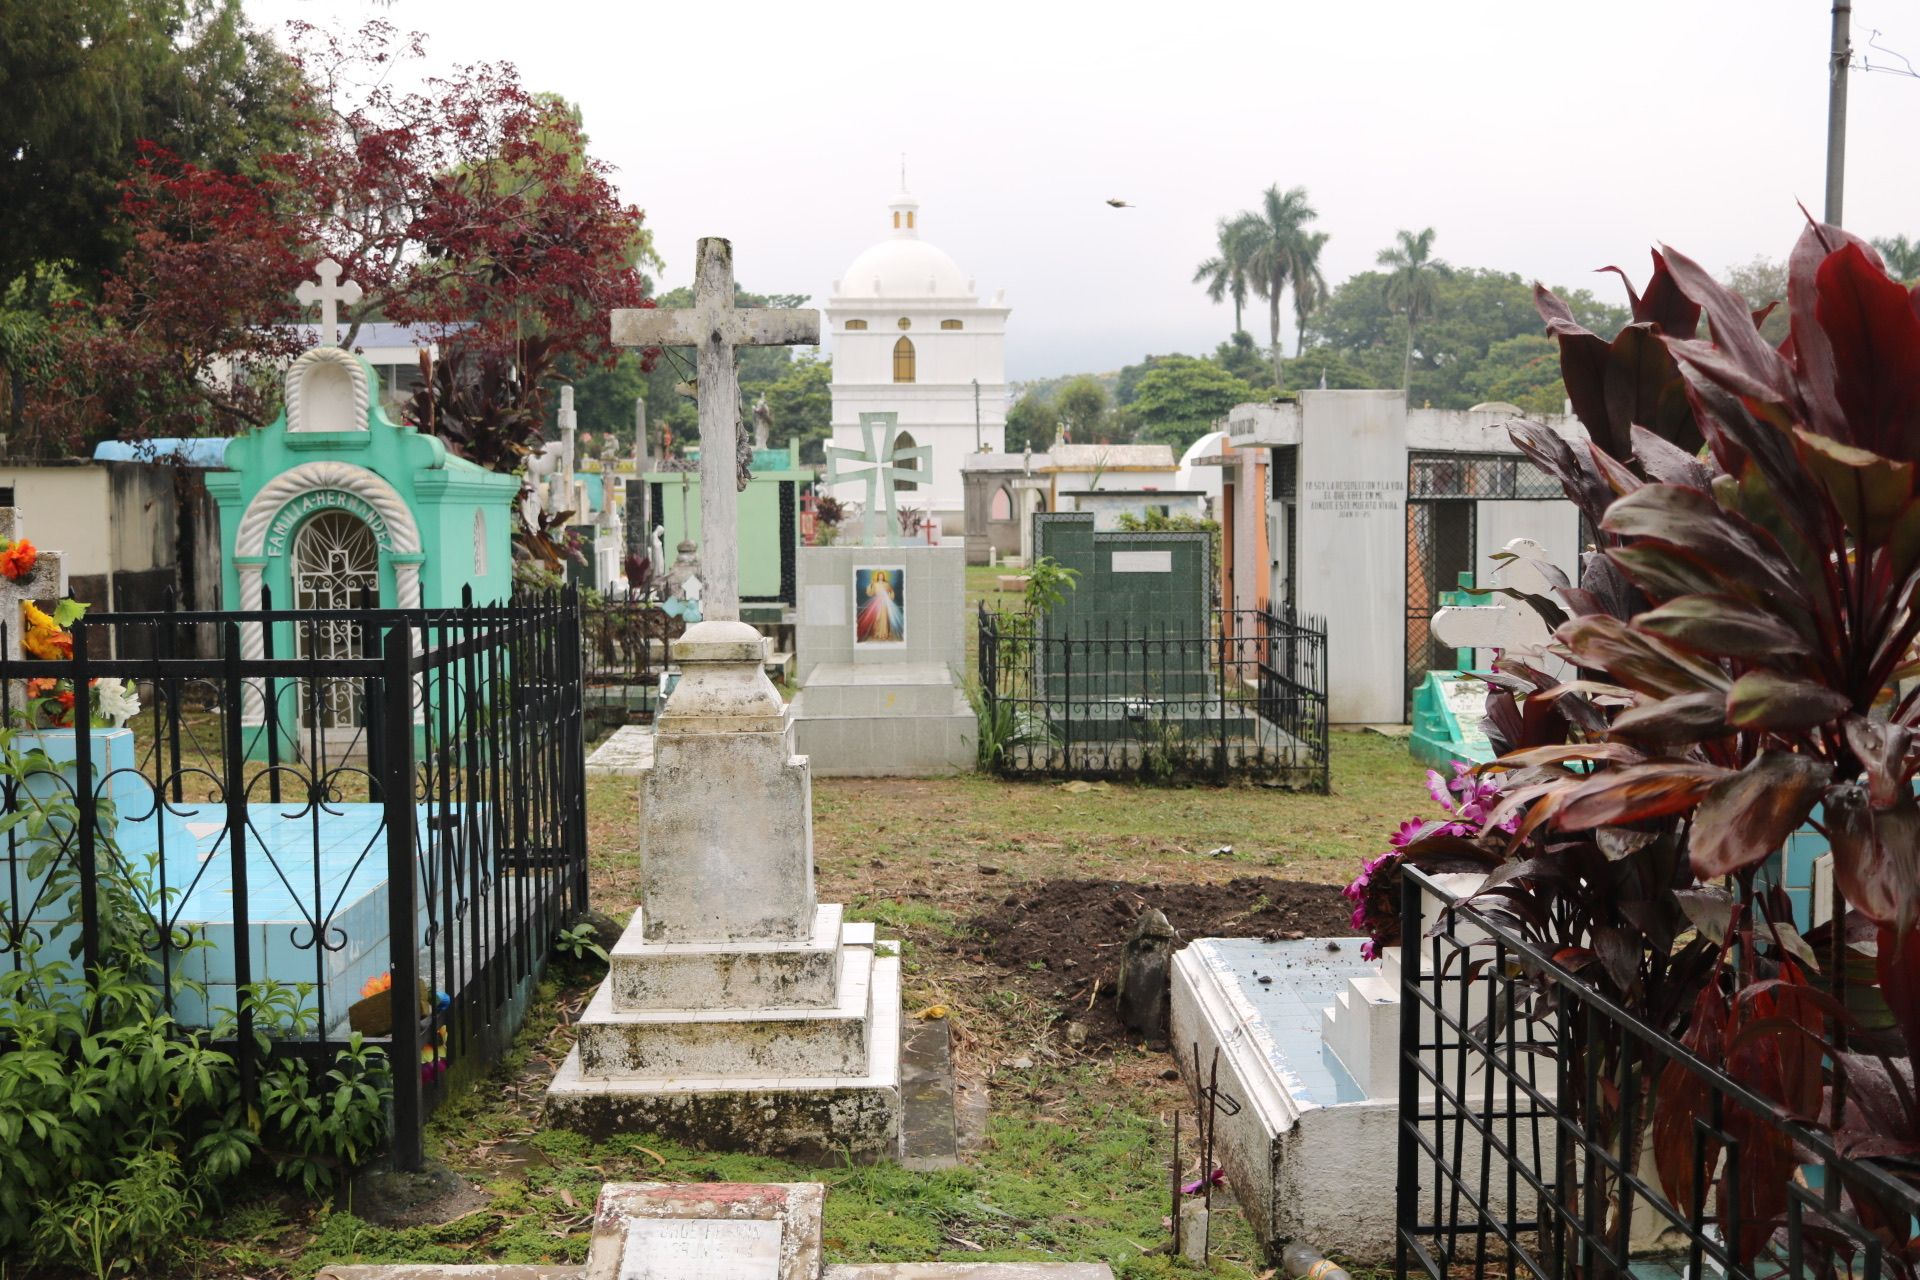 Muddy pathways weave in and out of gravestones at the Cementerio Municipal Santa Tecla. Image by Lauryn Claassen. El Salvador, 2017.